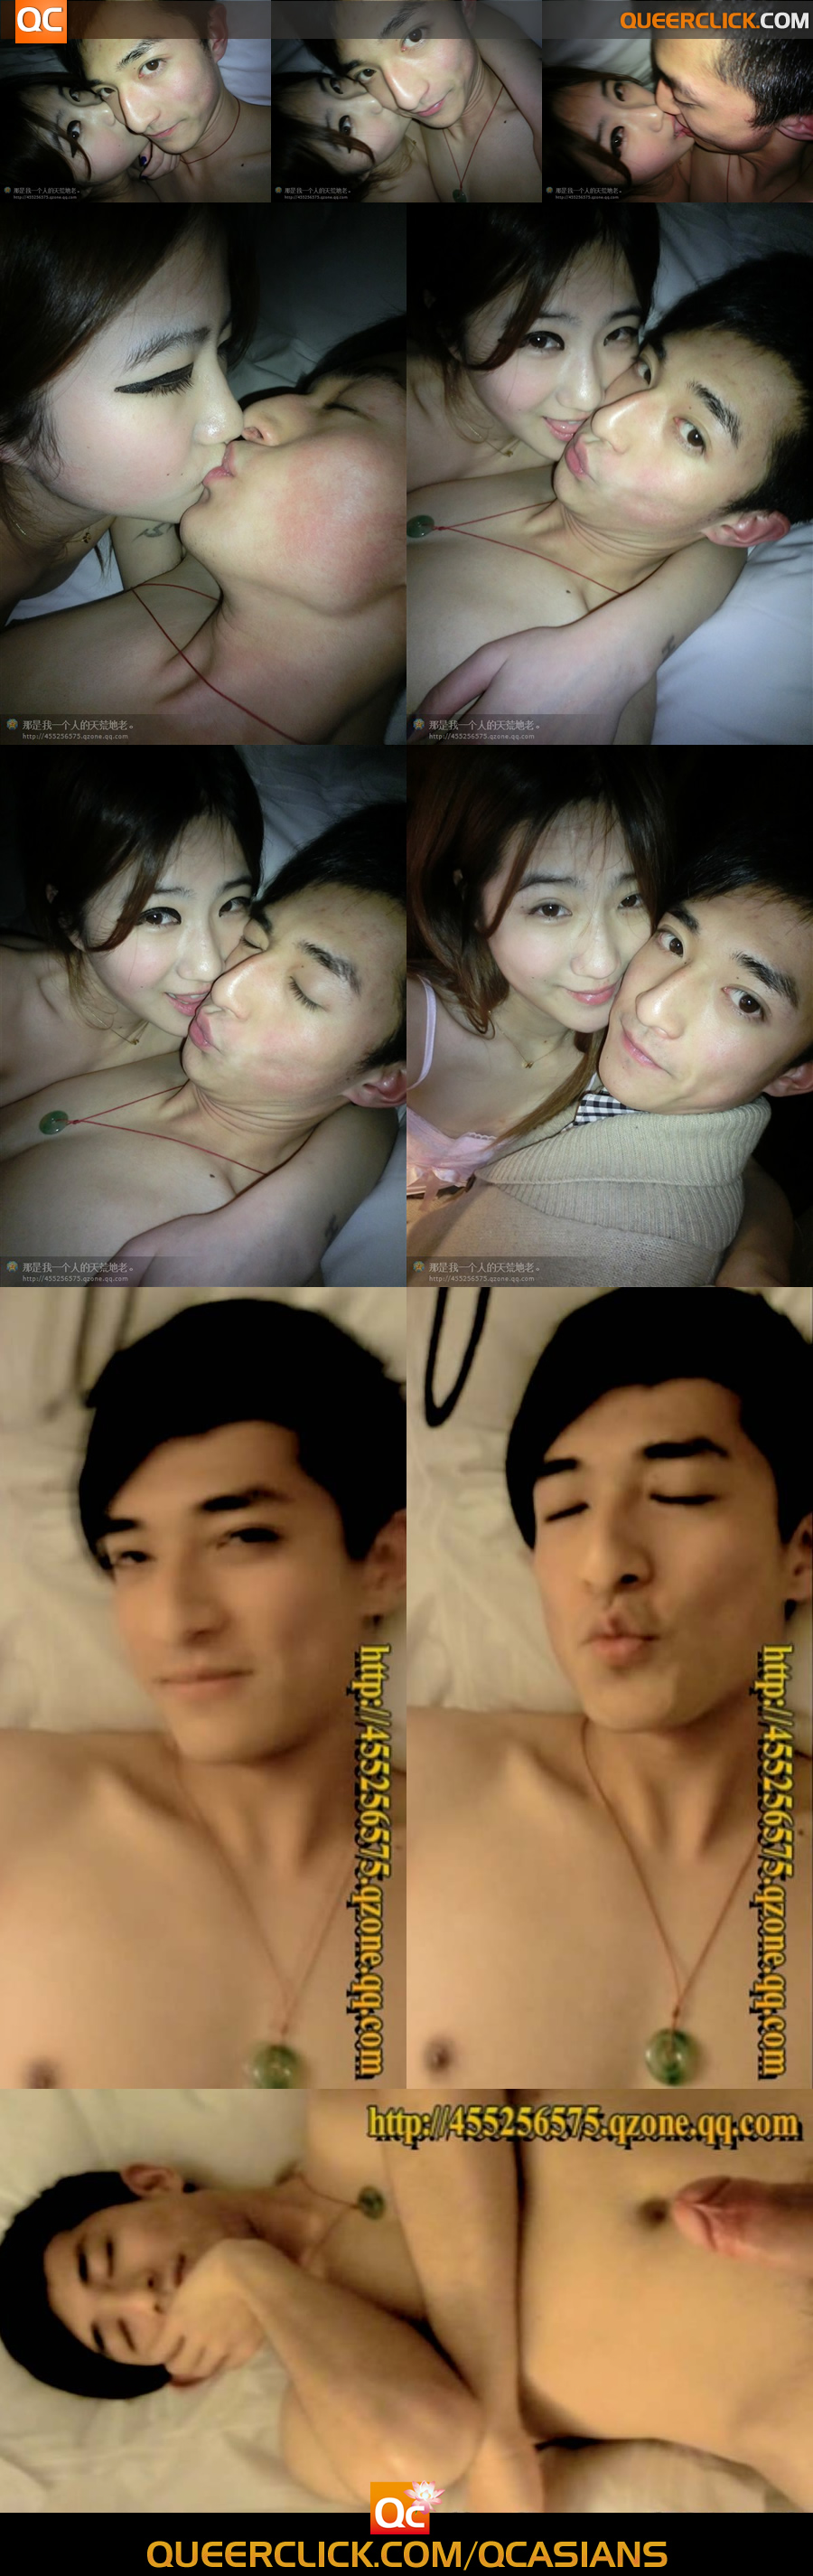 Video Straight Asian Couple Sex Tape Leaked pic